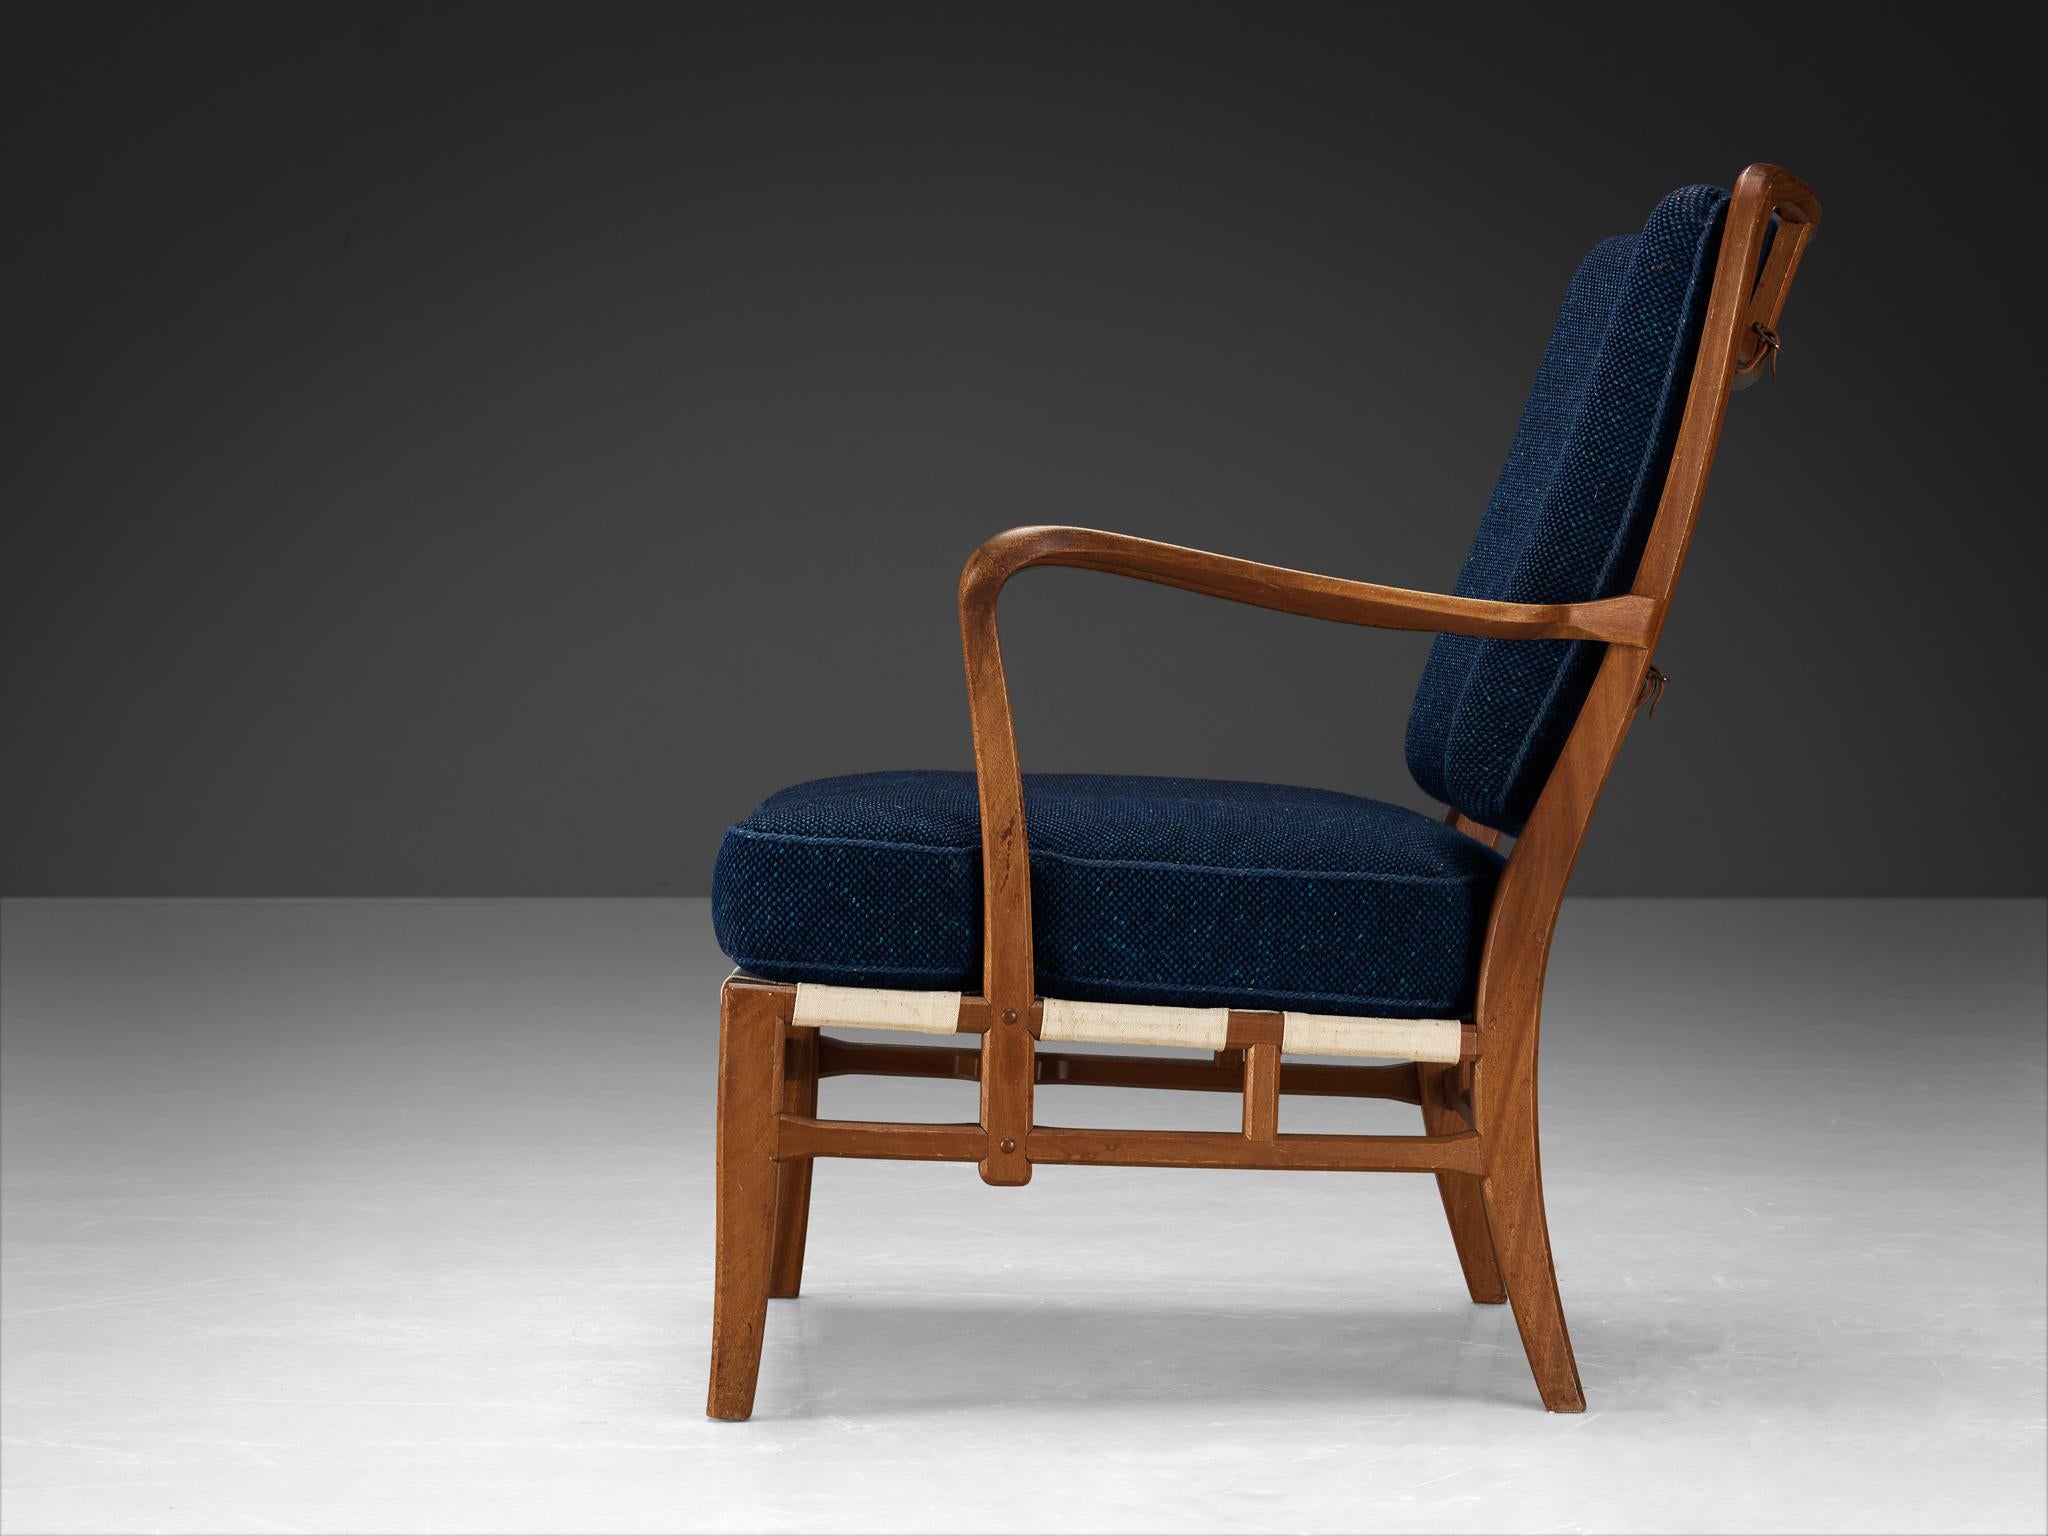 Mid-20th Century Carl-Axel Acking for Nk Hantverk Lounge Chair in Mahogany and Blue Wool  For Sale